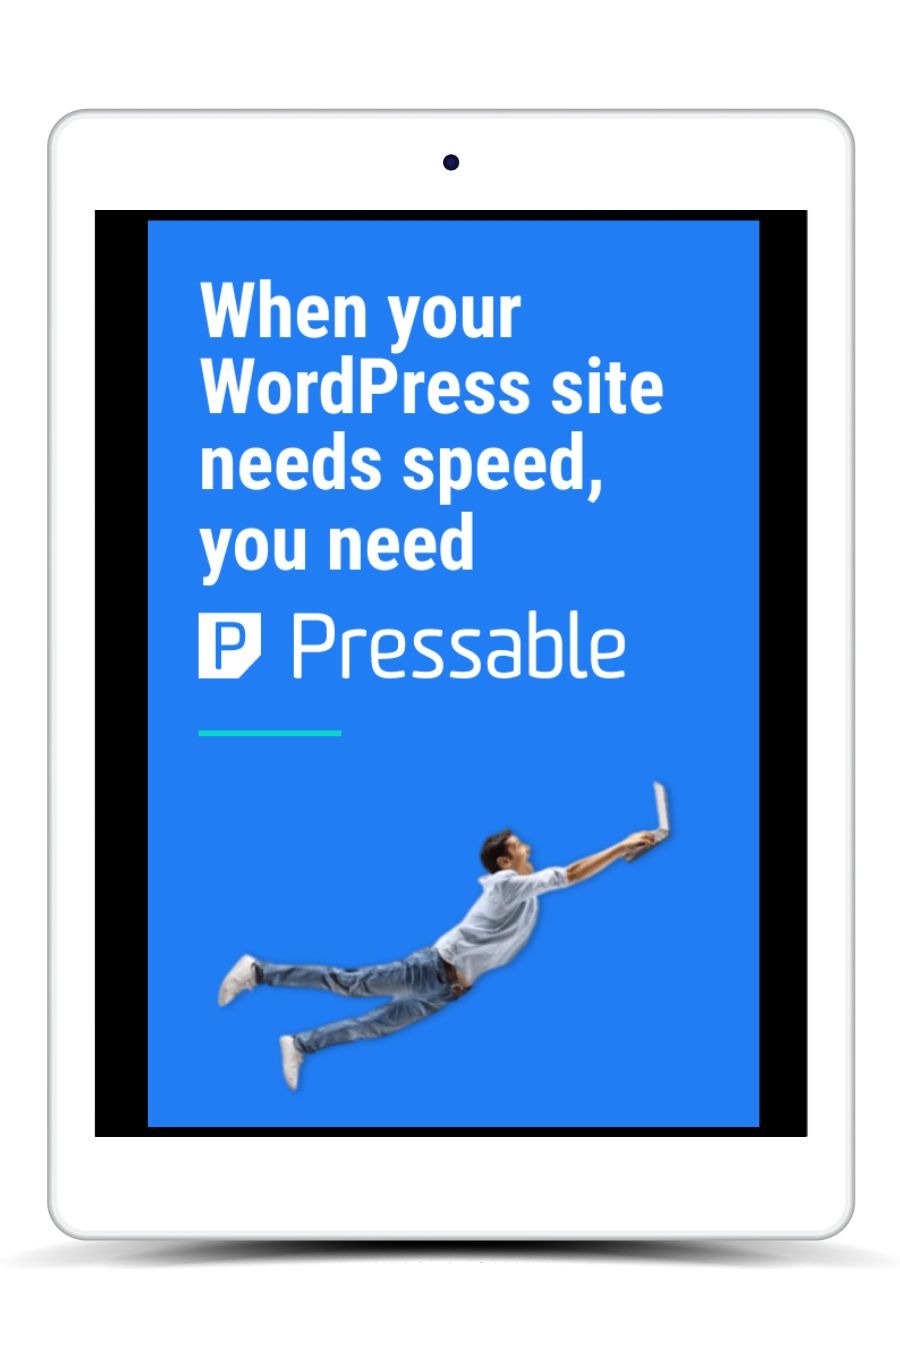 When your WordPress site needs SPEED, you need Pressable.